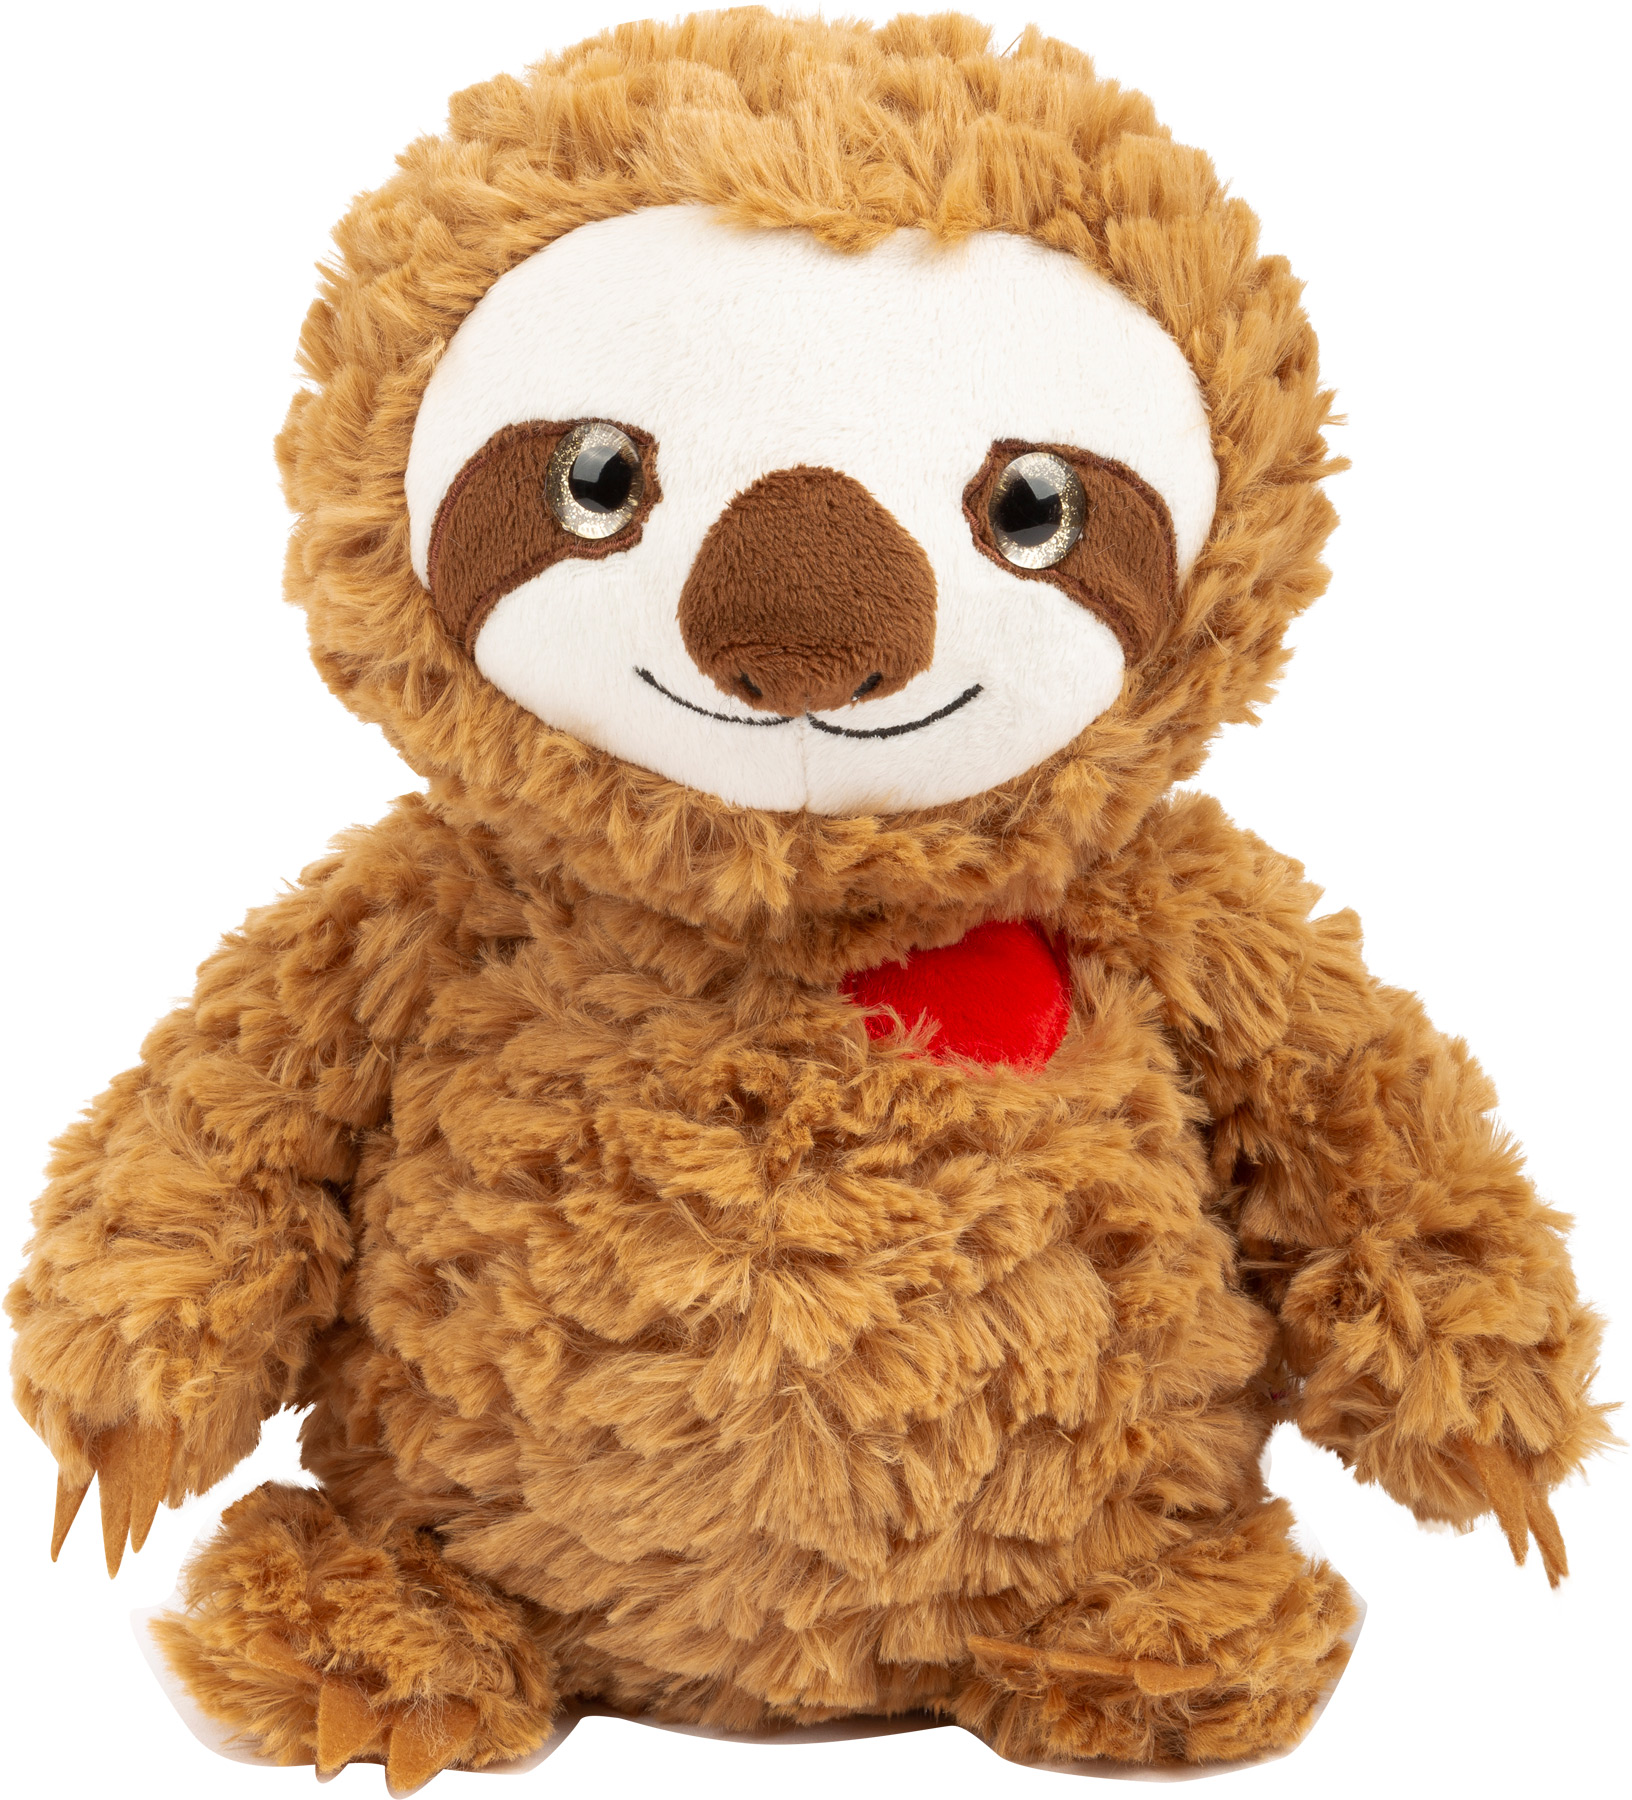 Sloth Cuddly Toy with Heart